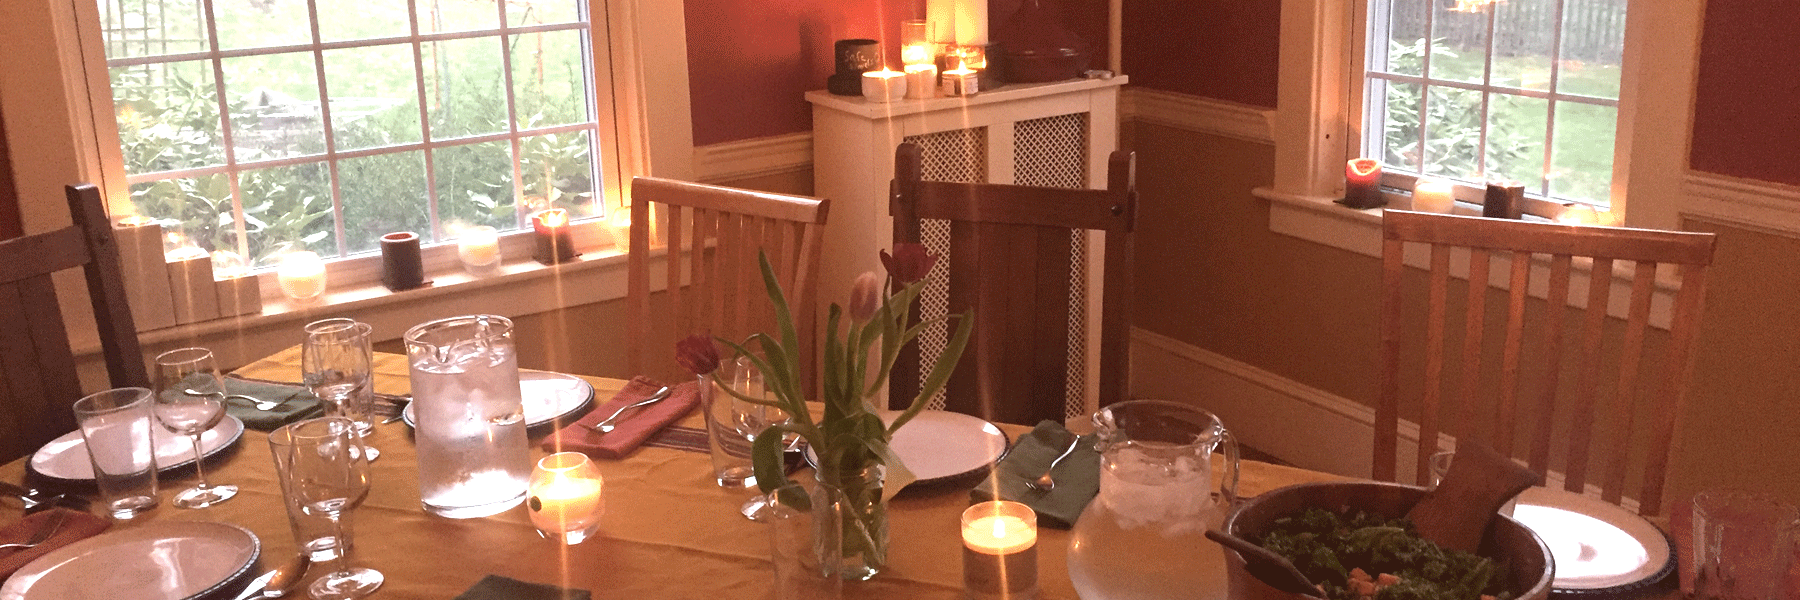 Fair trade candles lit in dining room handmade by Propserity Candle's women artisans